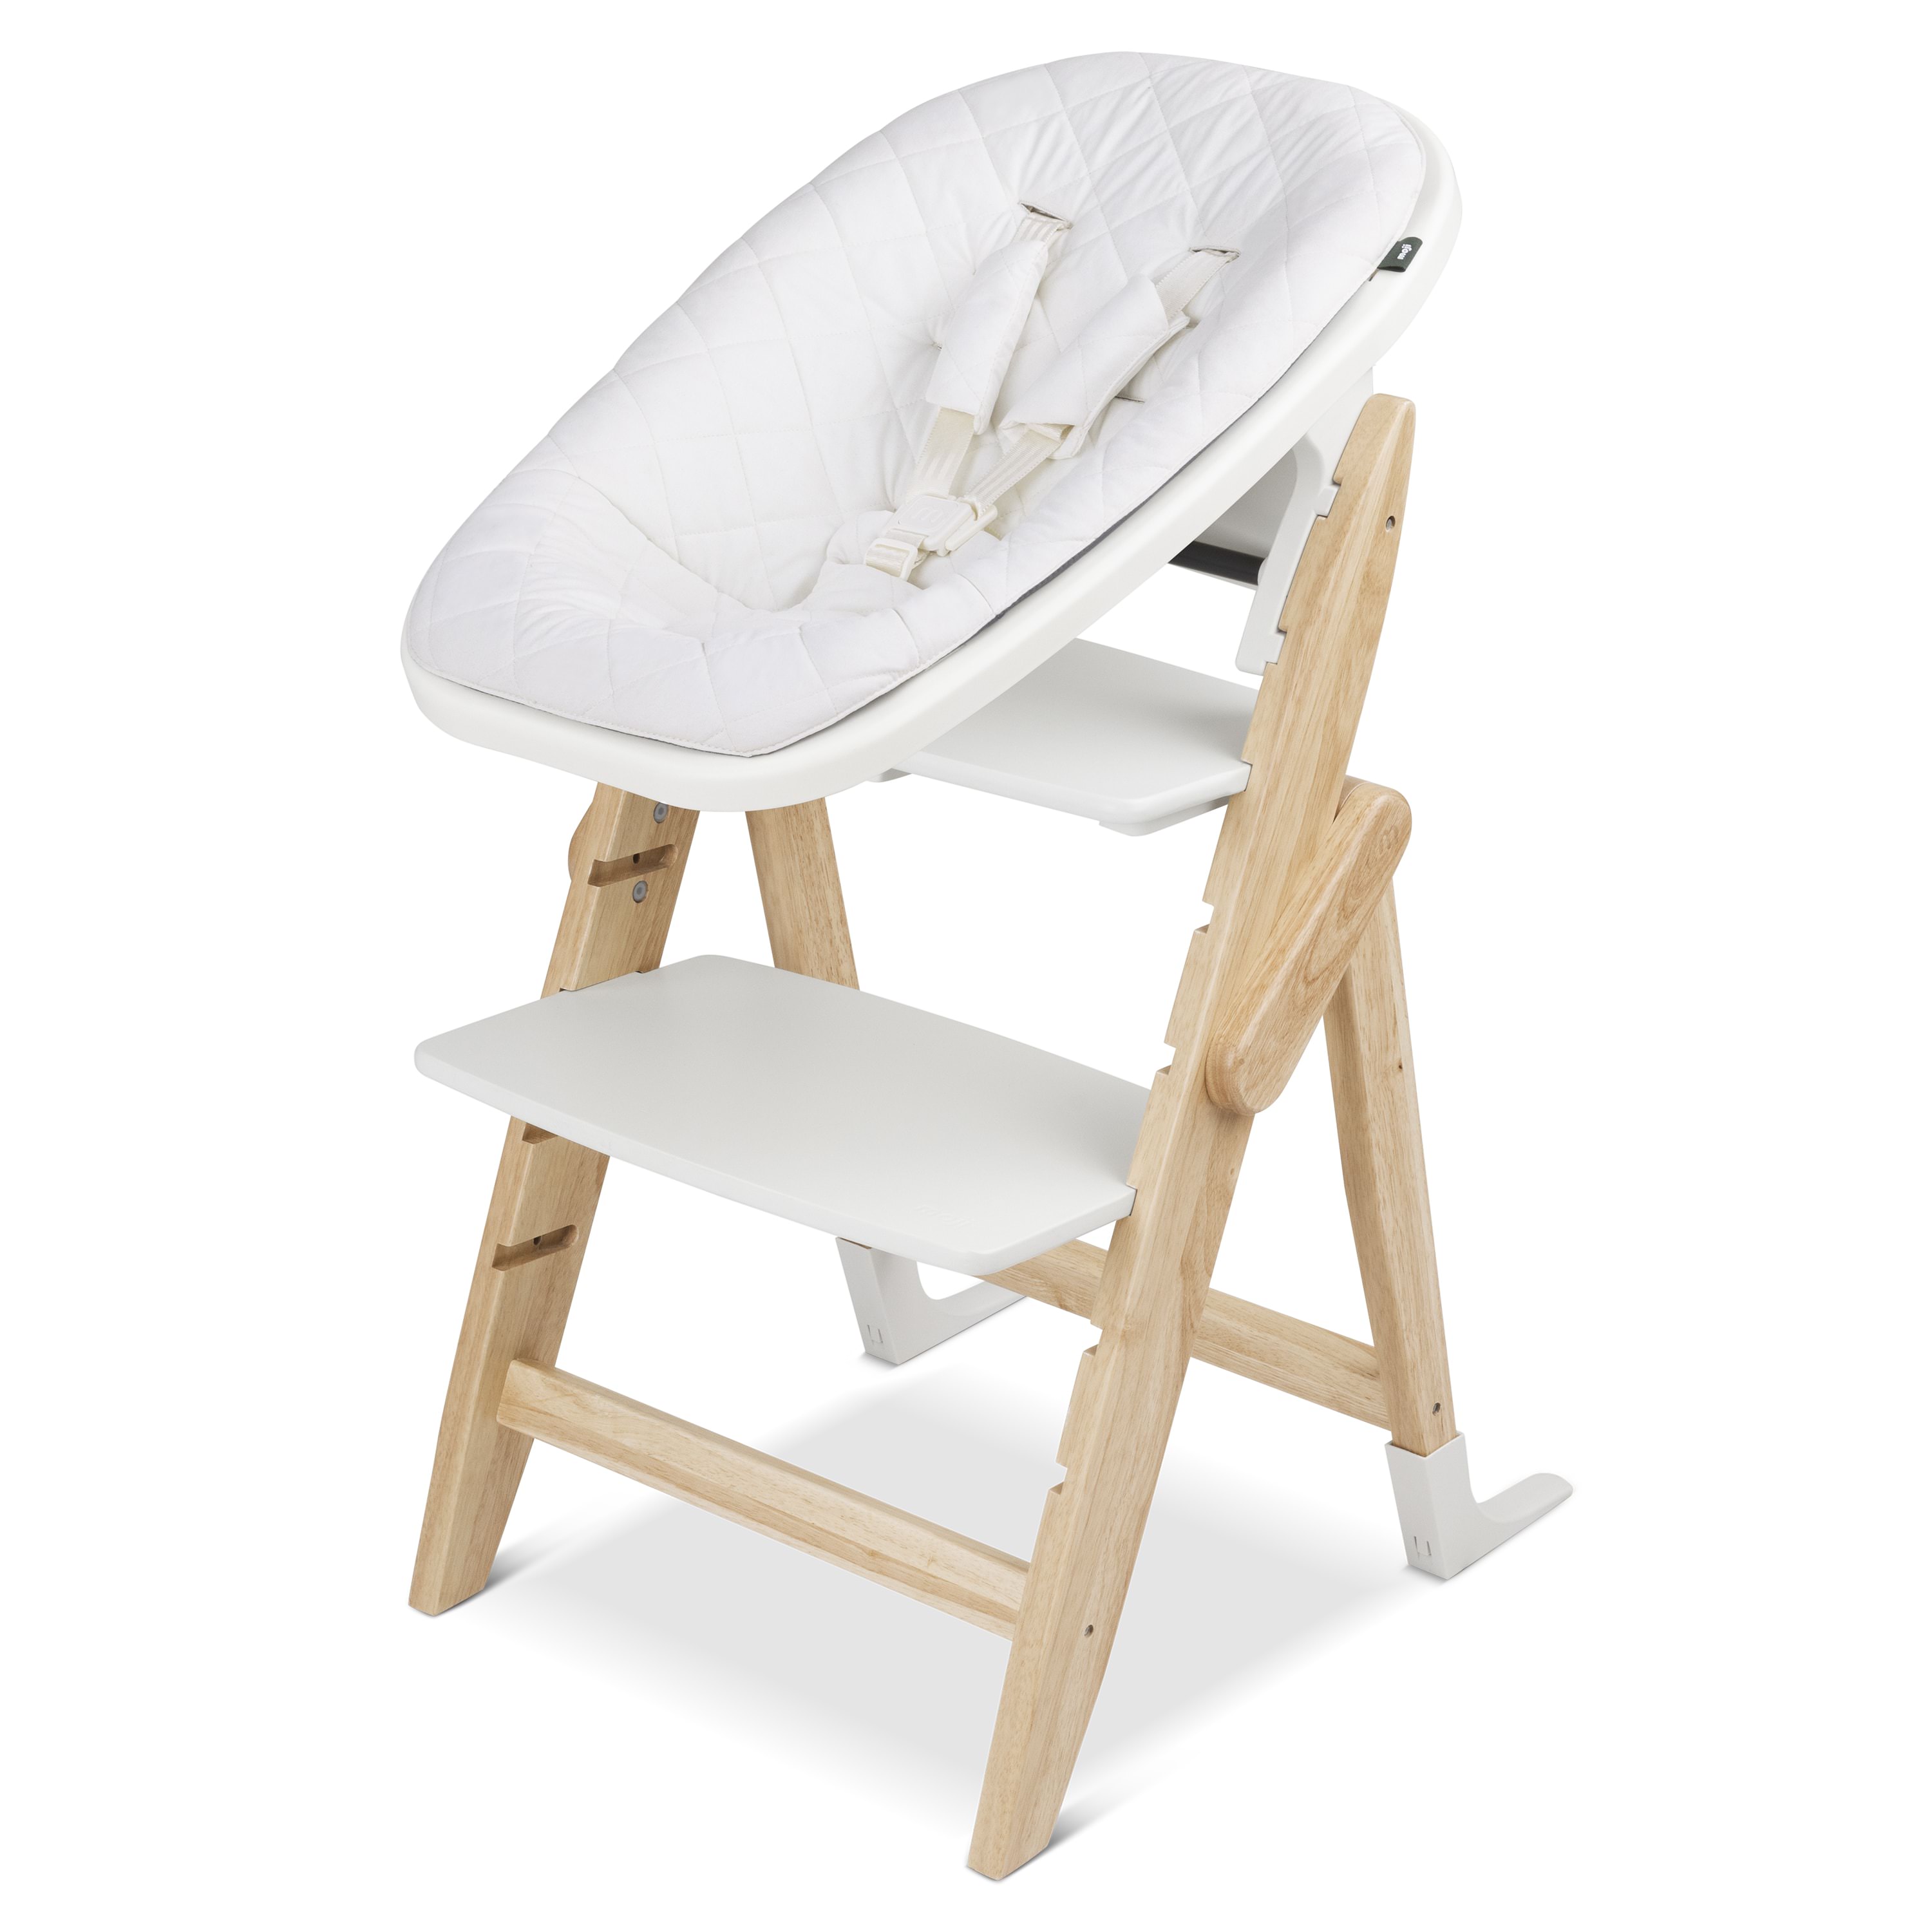 Accessories | moji | Original accessories for the YIPPY high chair